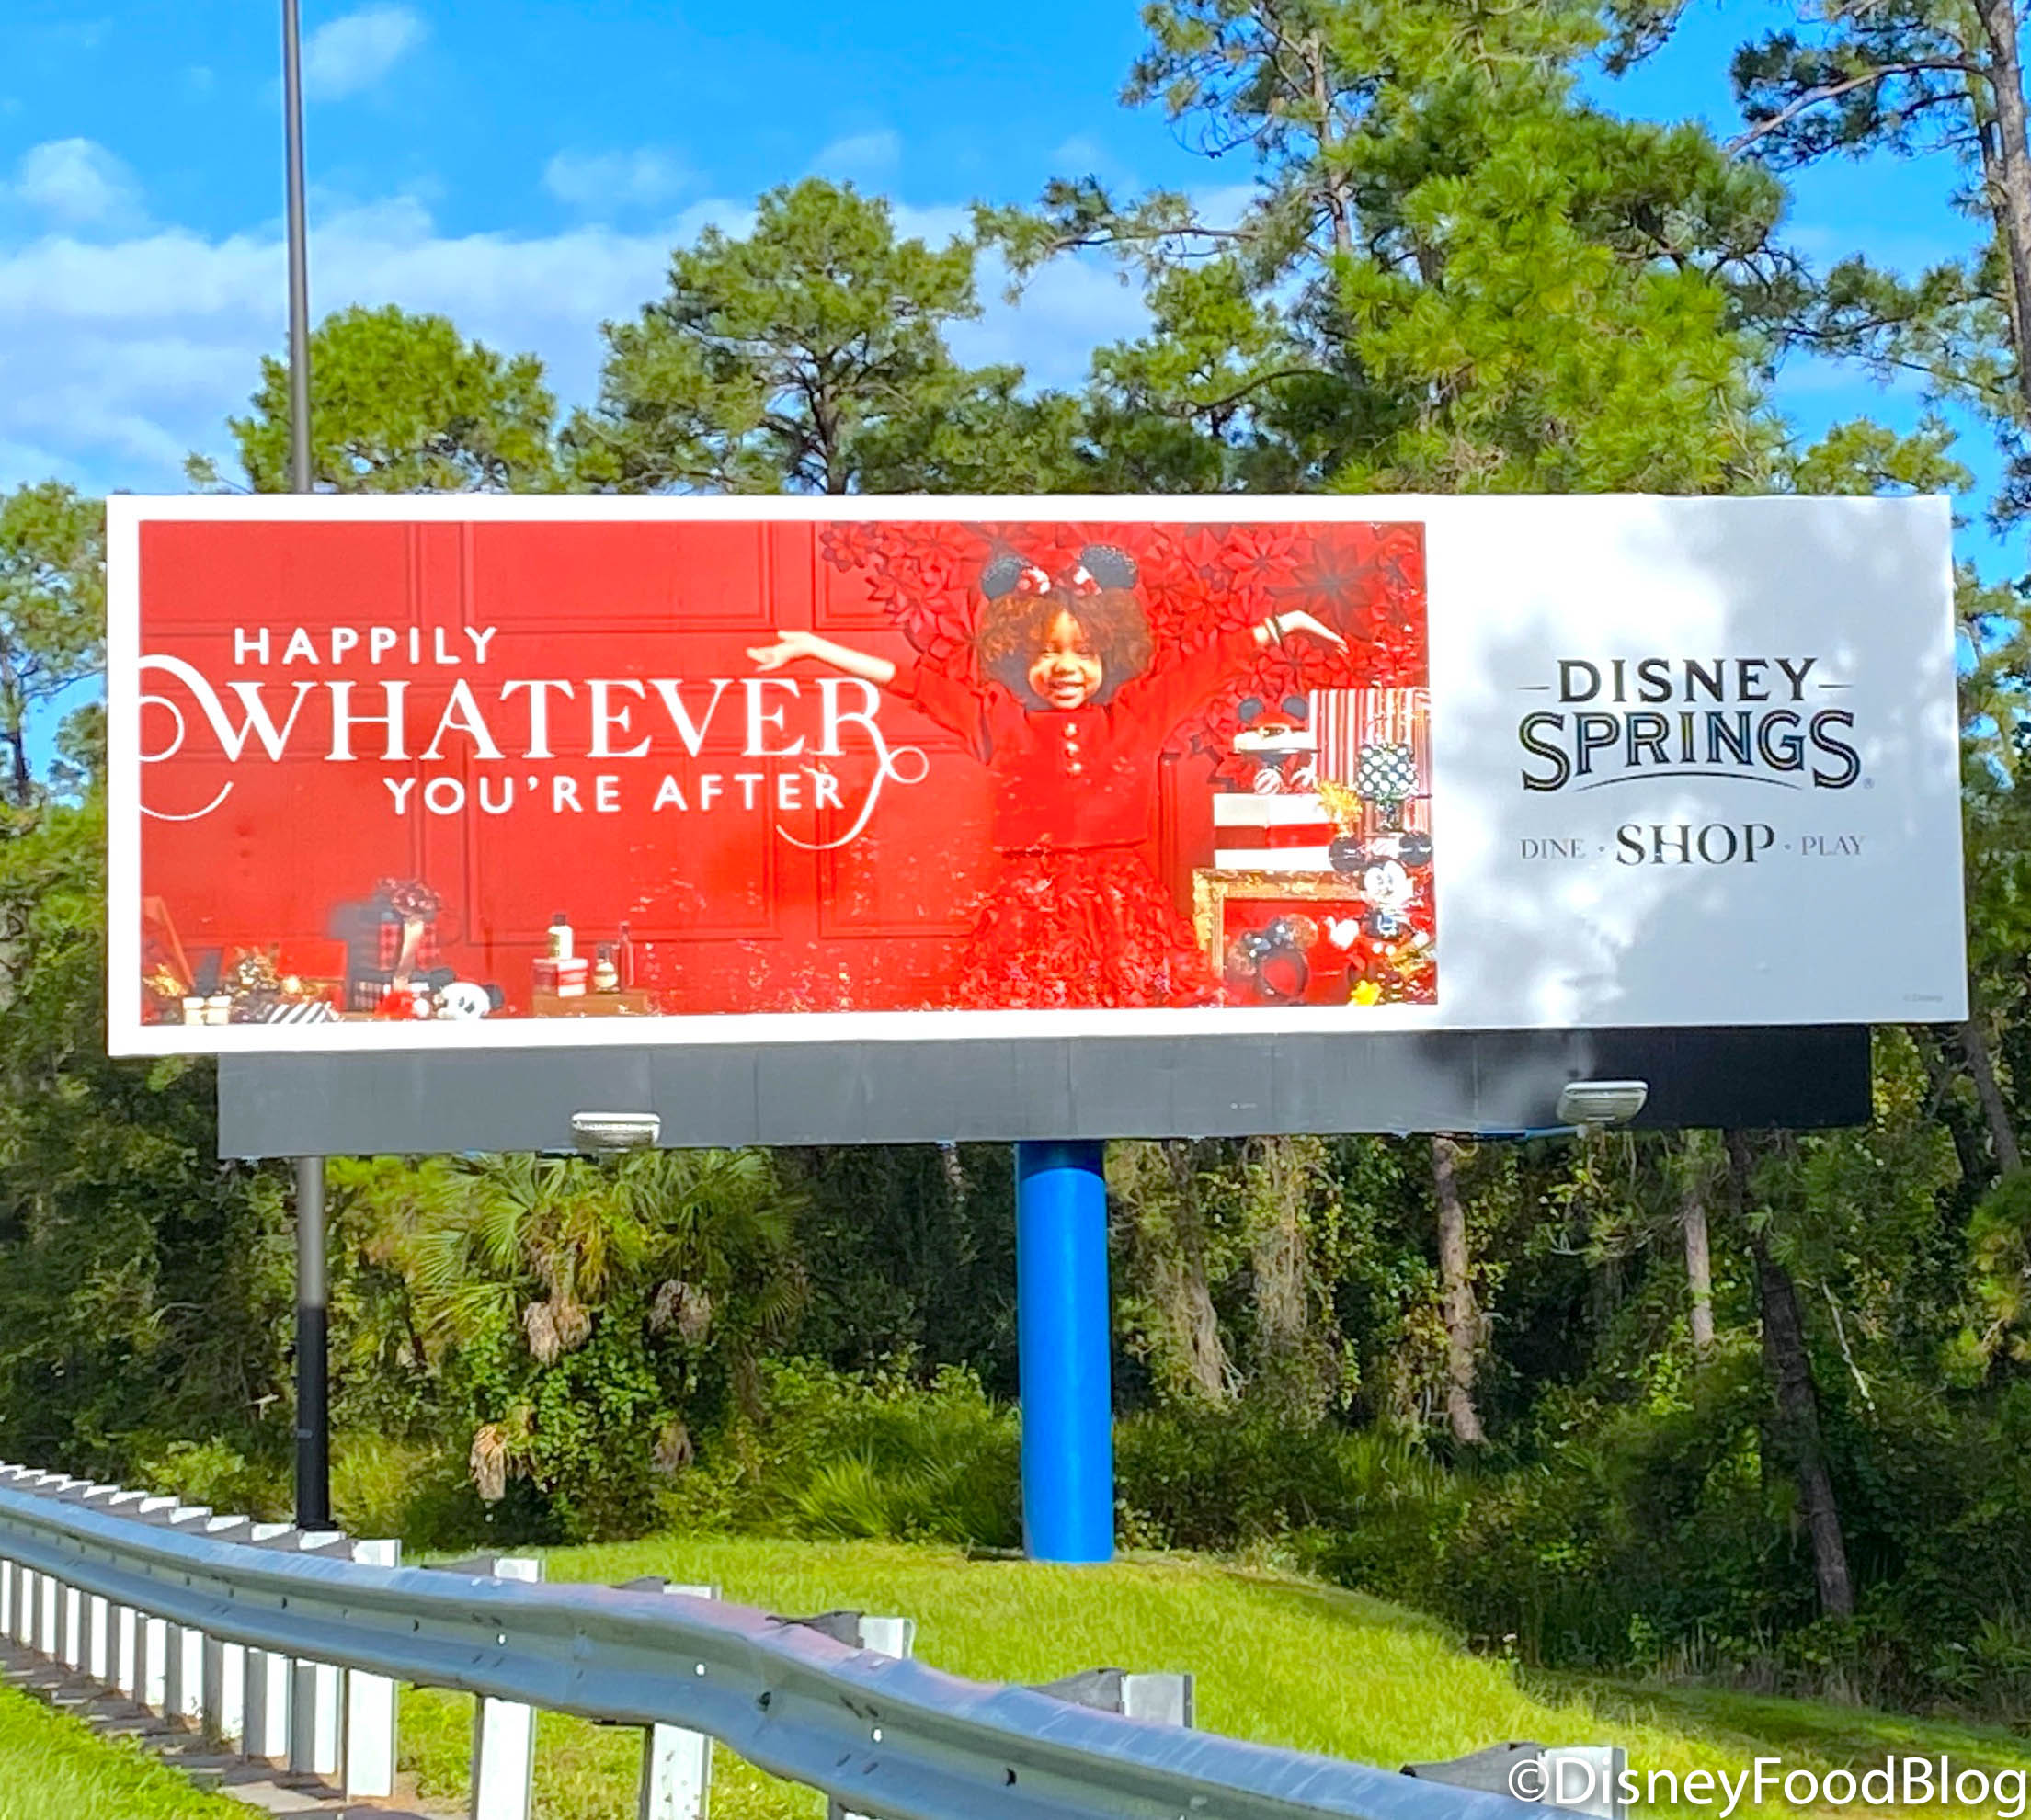 how do i get from disney springs to the magic kingdom?